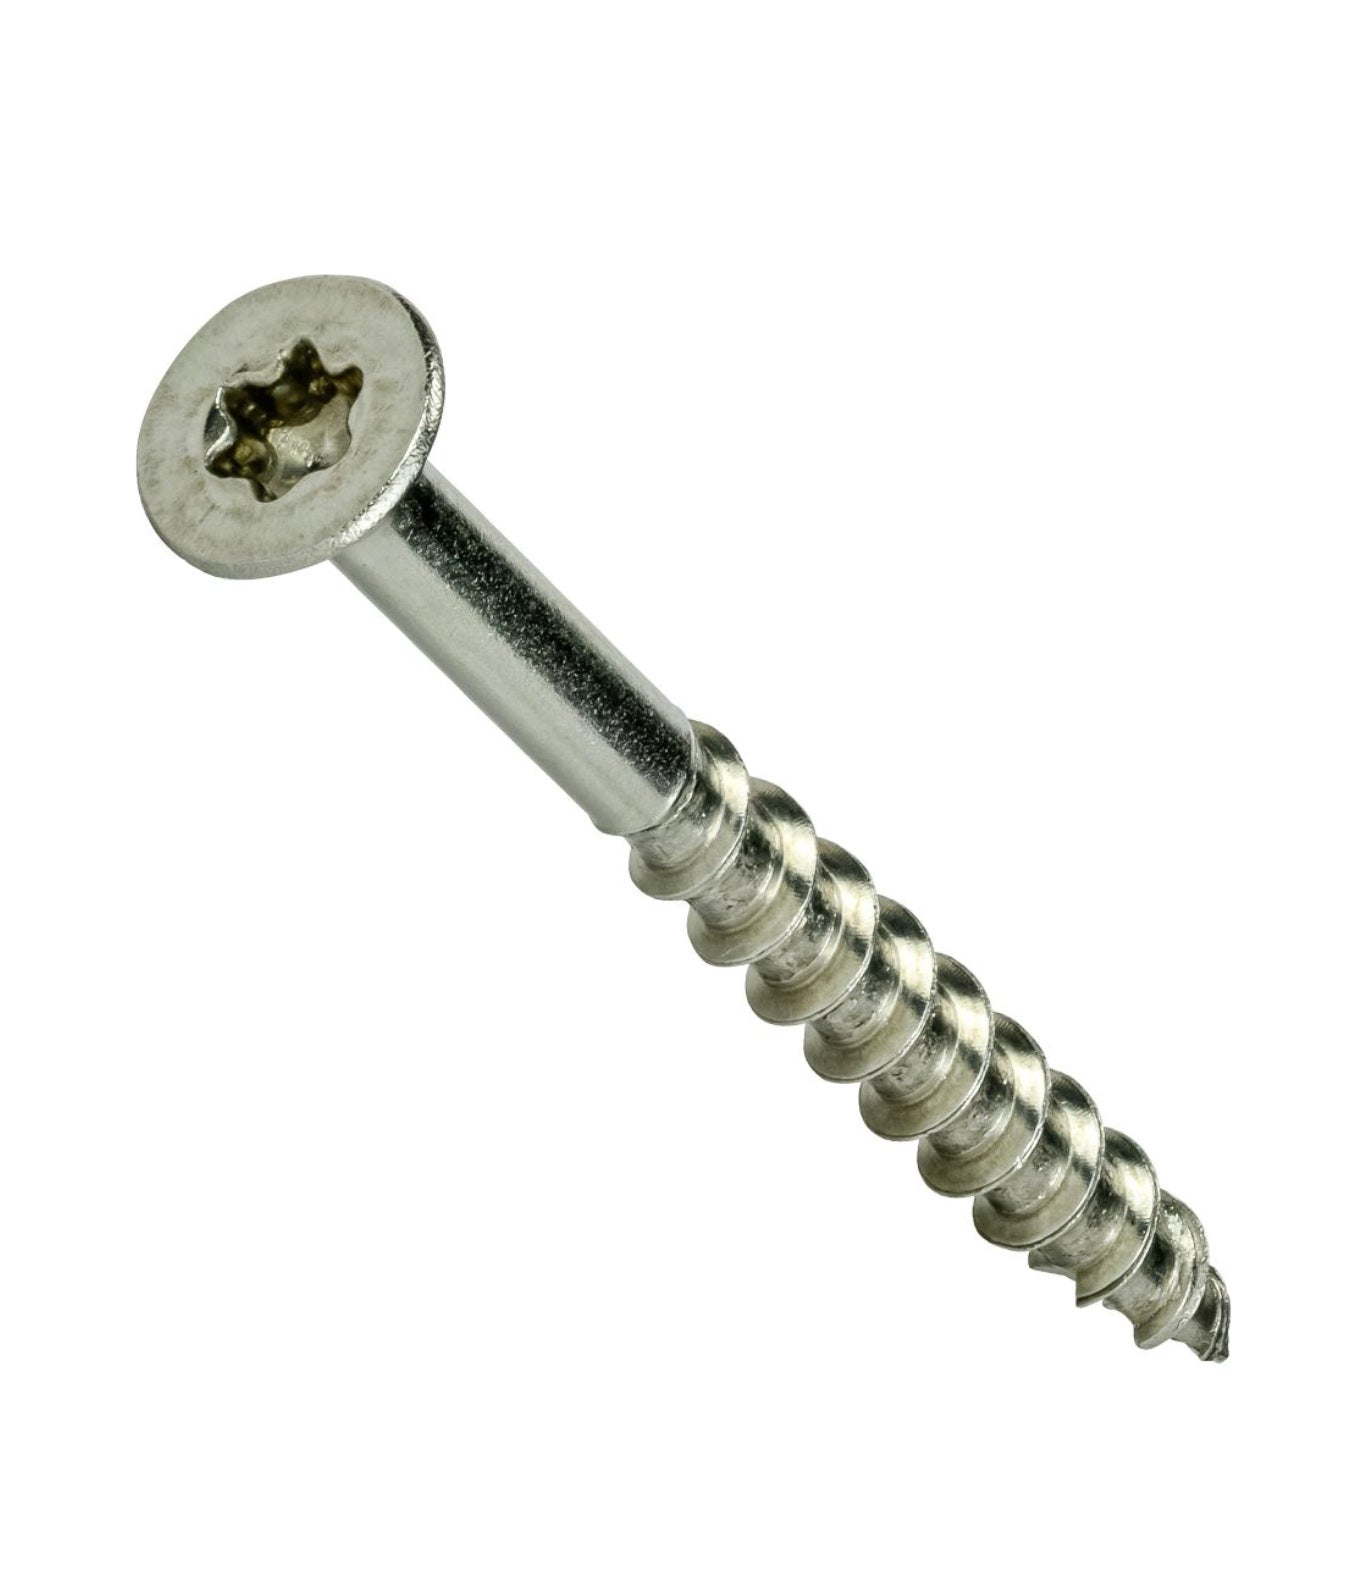 Deck Screws, 18-8 Stainless Steel, Star Drive, Bugle Drive, Type 17 Wood Cutting Point